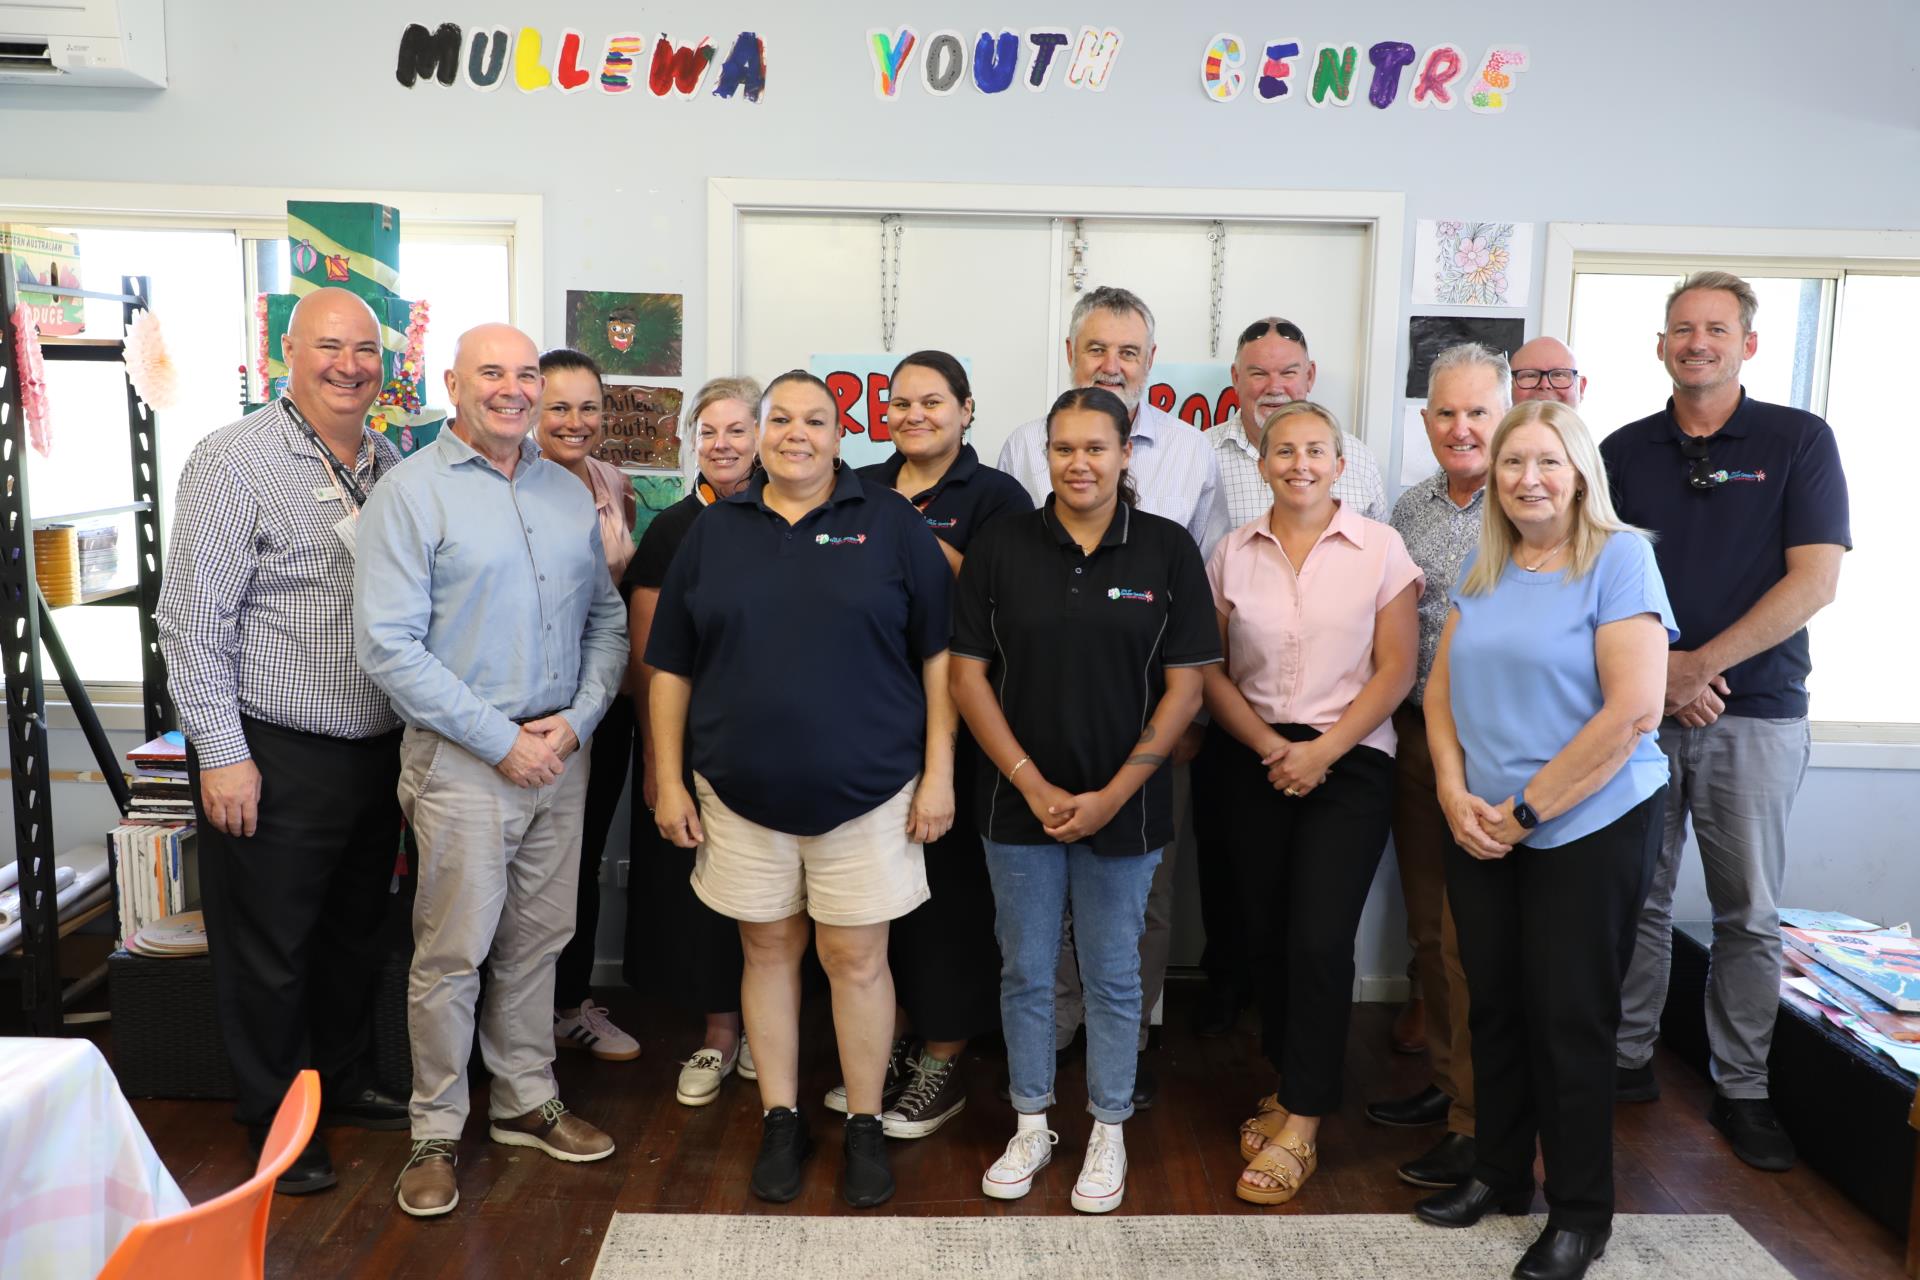 Mullewa Youth Centre welcomes funding extension